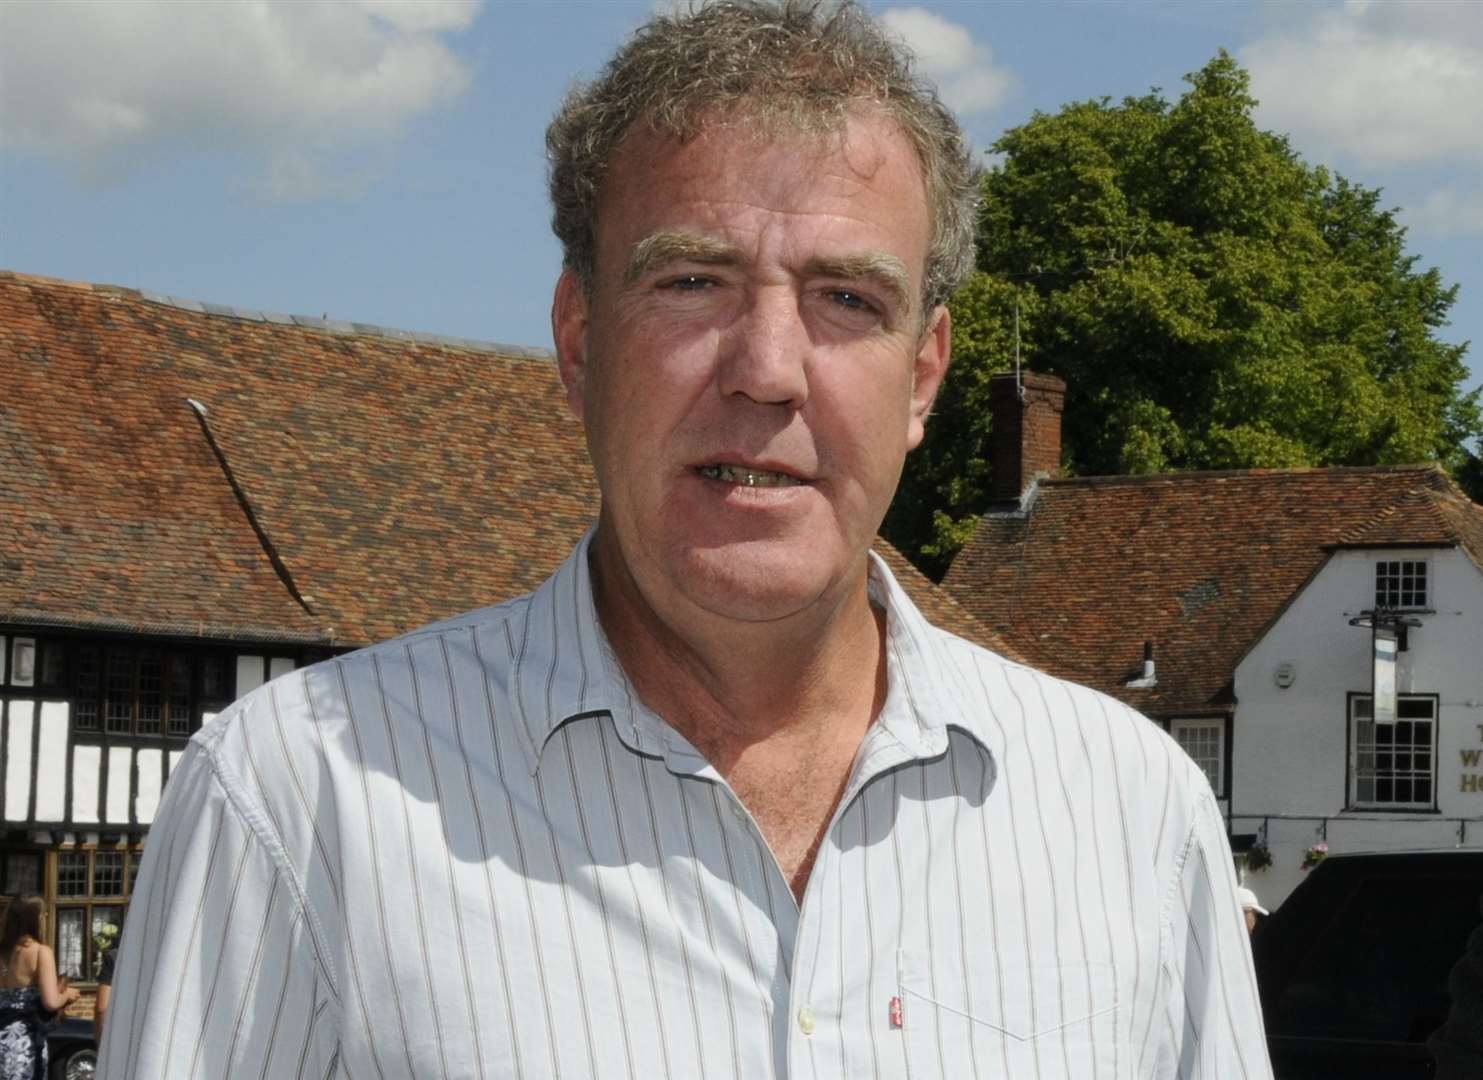 Jeremy Clarkson has showcased the trials and tribulations of running a farm